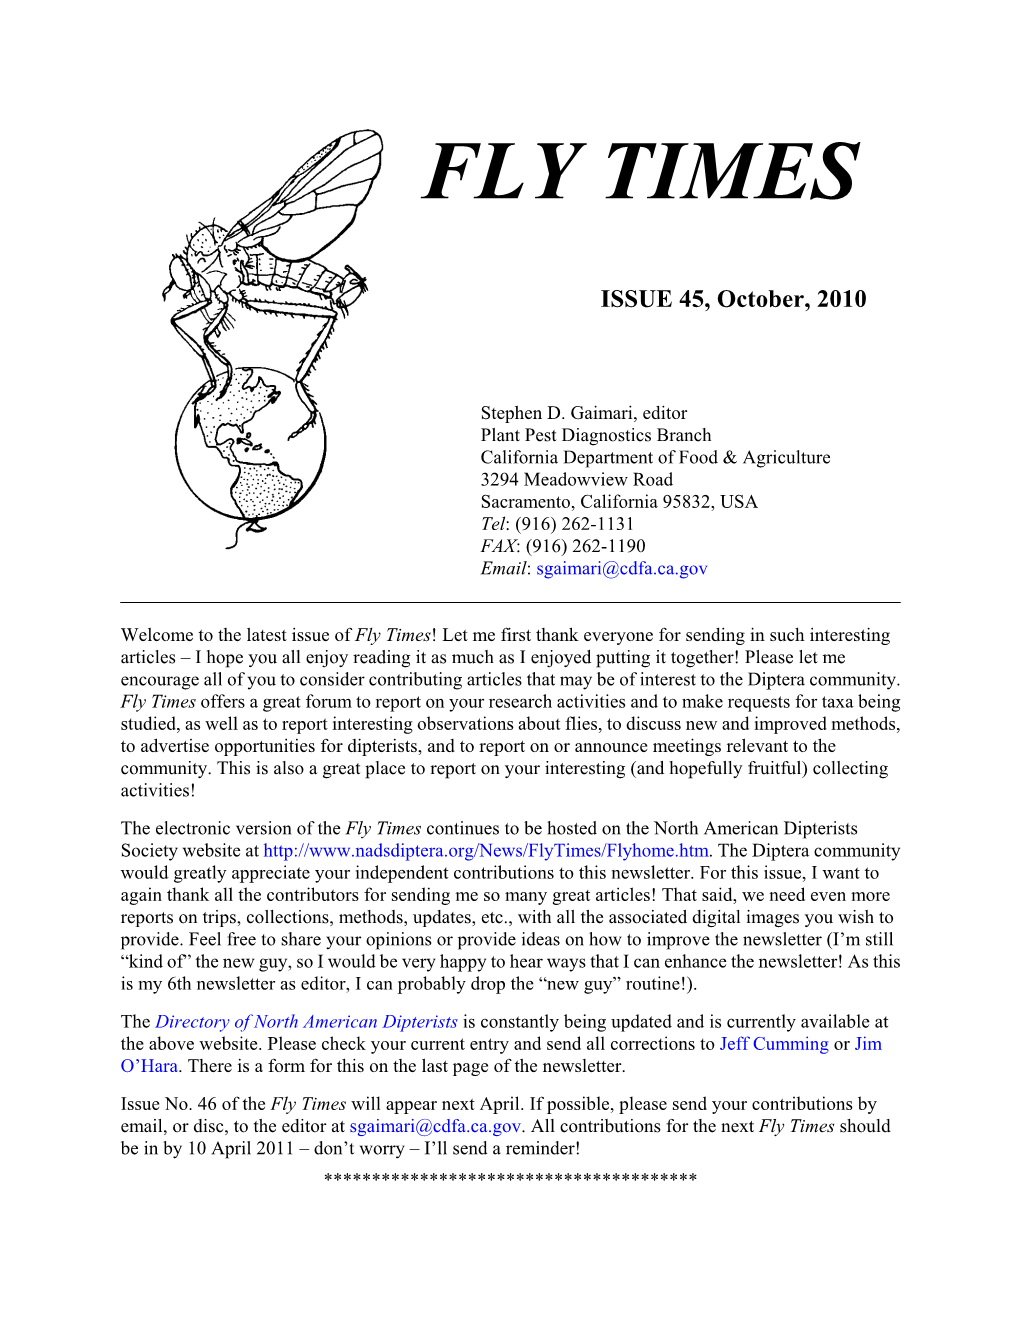 Fly Times Issue 45, October 2010